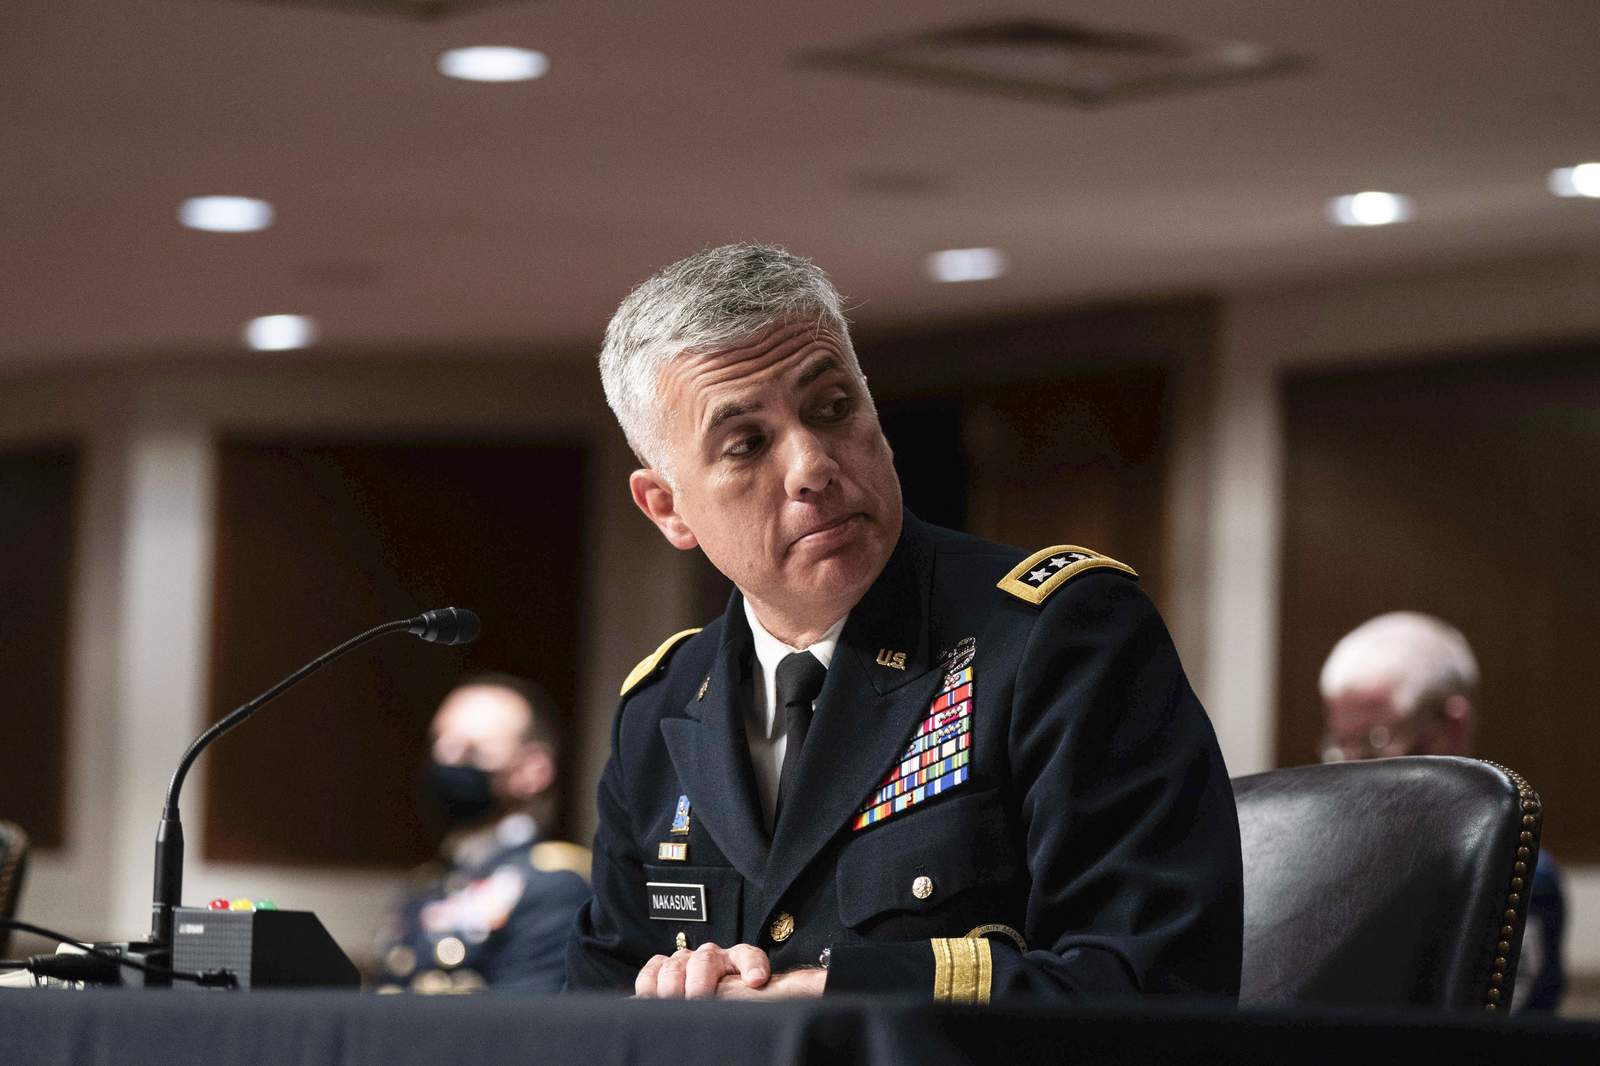 General says attacks by foreign hackers are 'clarion call'